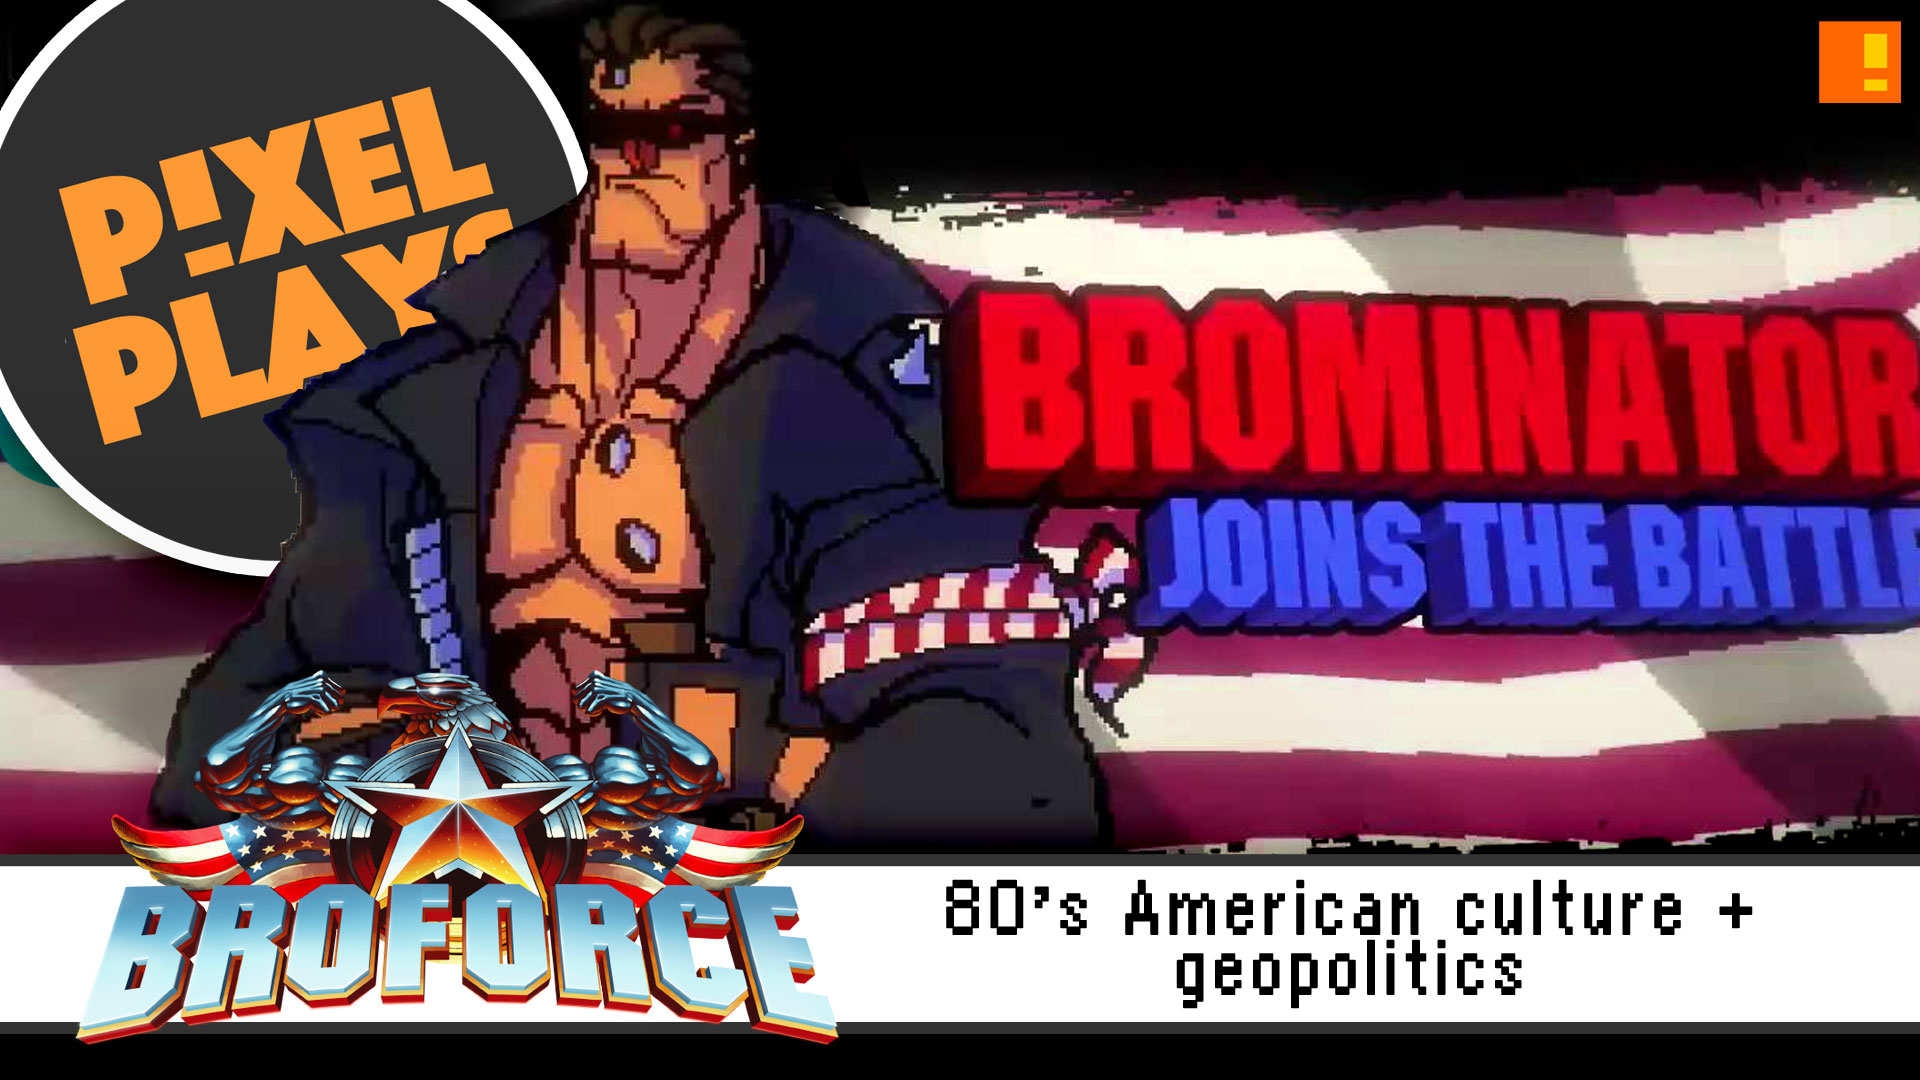 Pixel Plays | "Broforce": A 8-bit history lesson in 80's American culture and Geopolitics . @theactionpixel